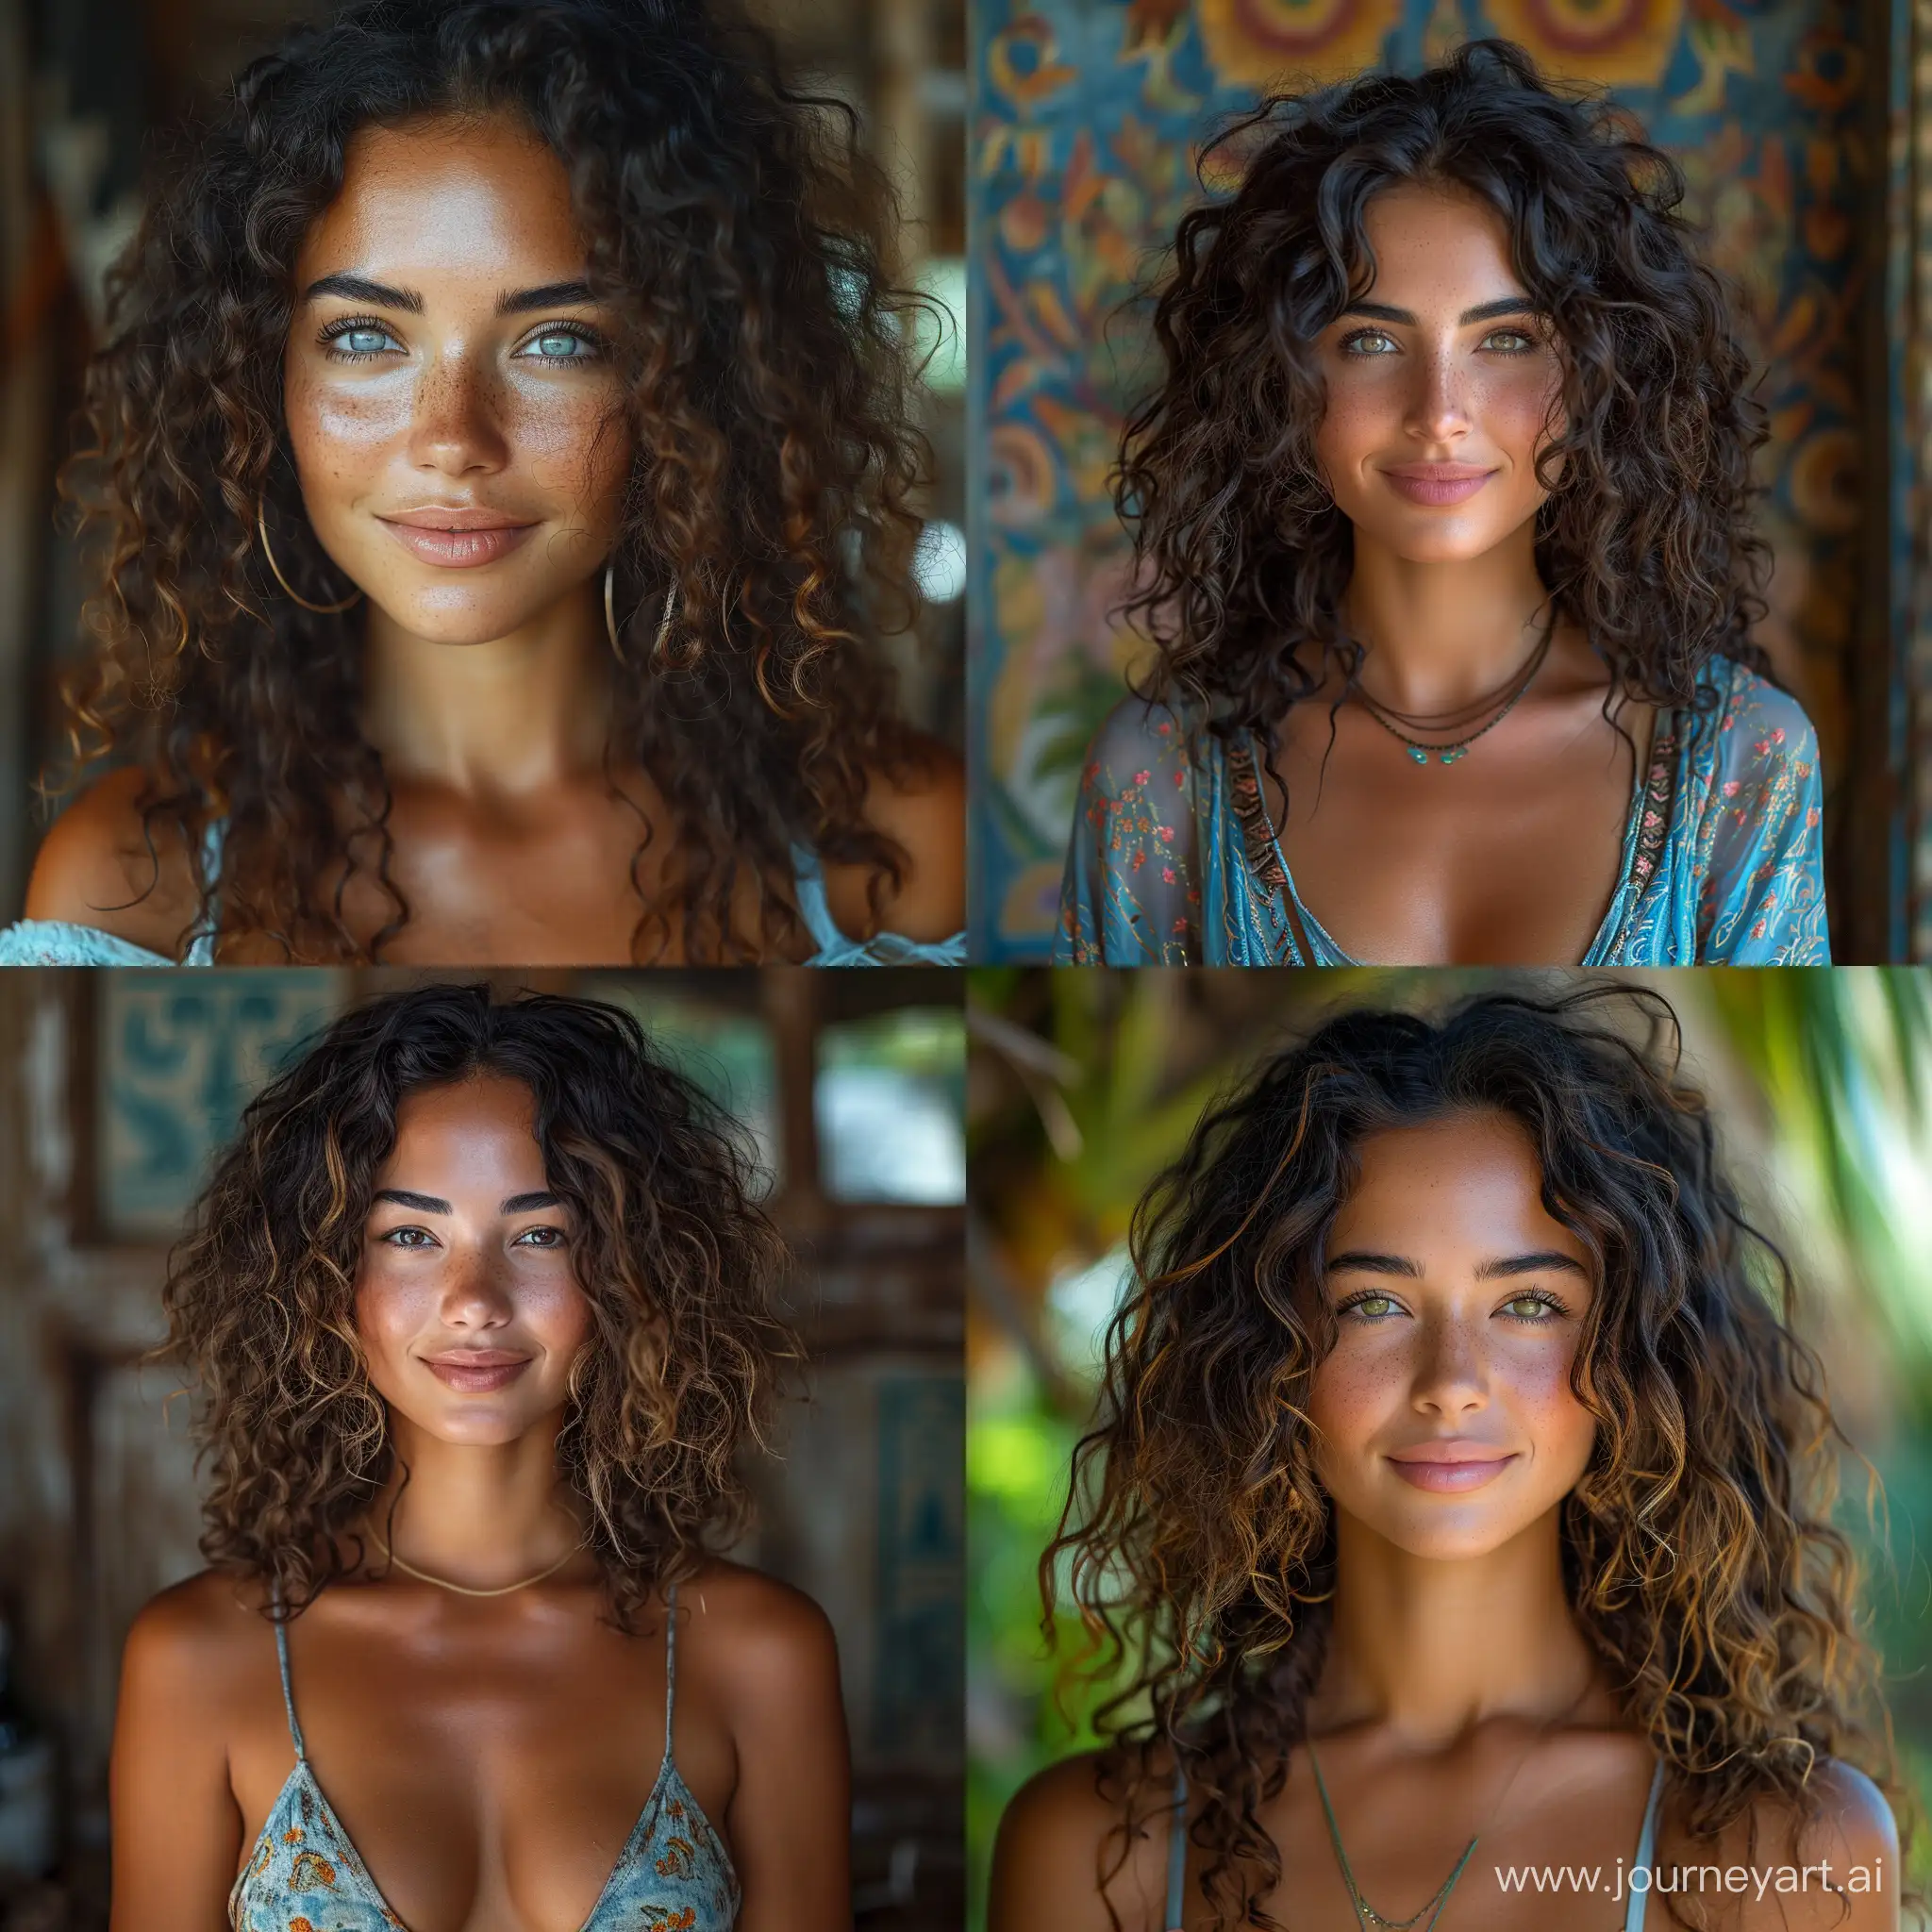 /imagine a beautiful  girl with calry hair 20 years old Egyption is African savannah looking with smile emotions Hyper-realistic, cinematic photography, 4K, HD, 16/9 --s 750 --style raw